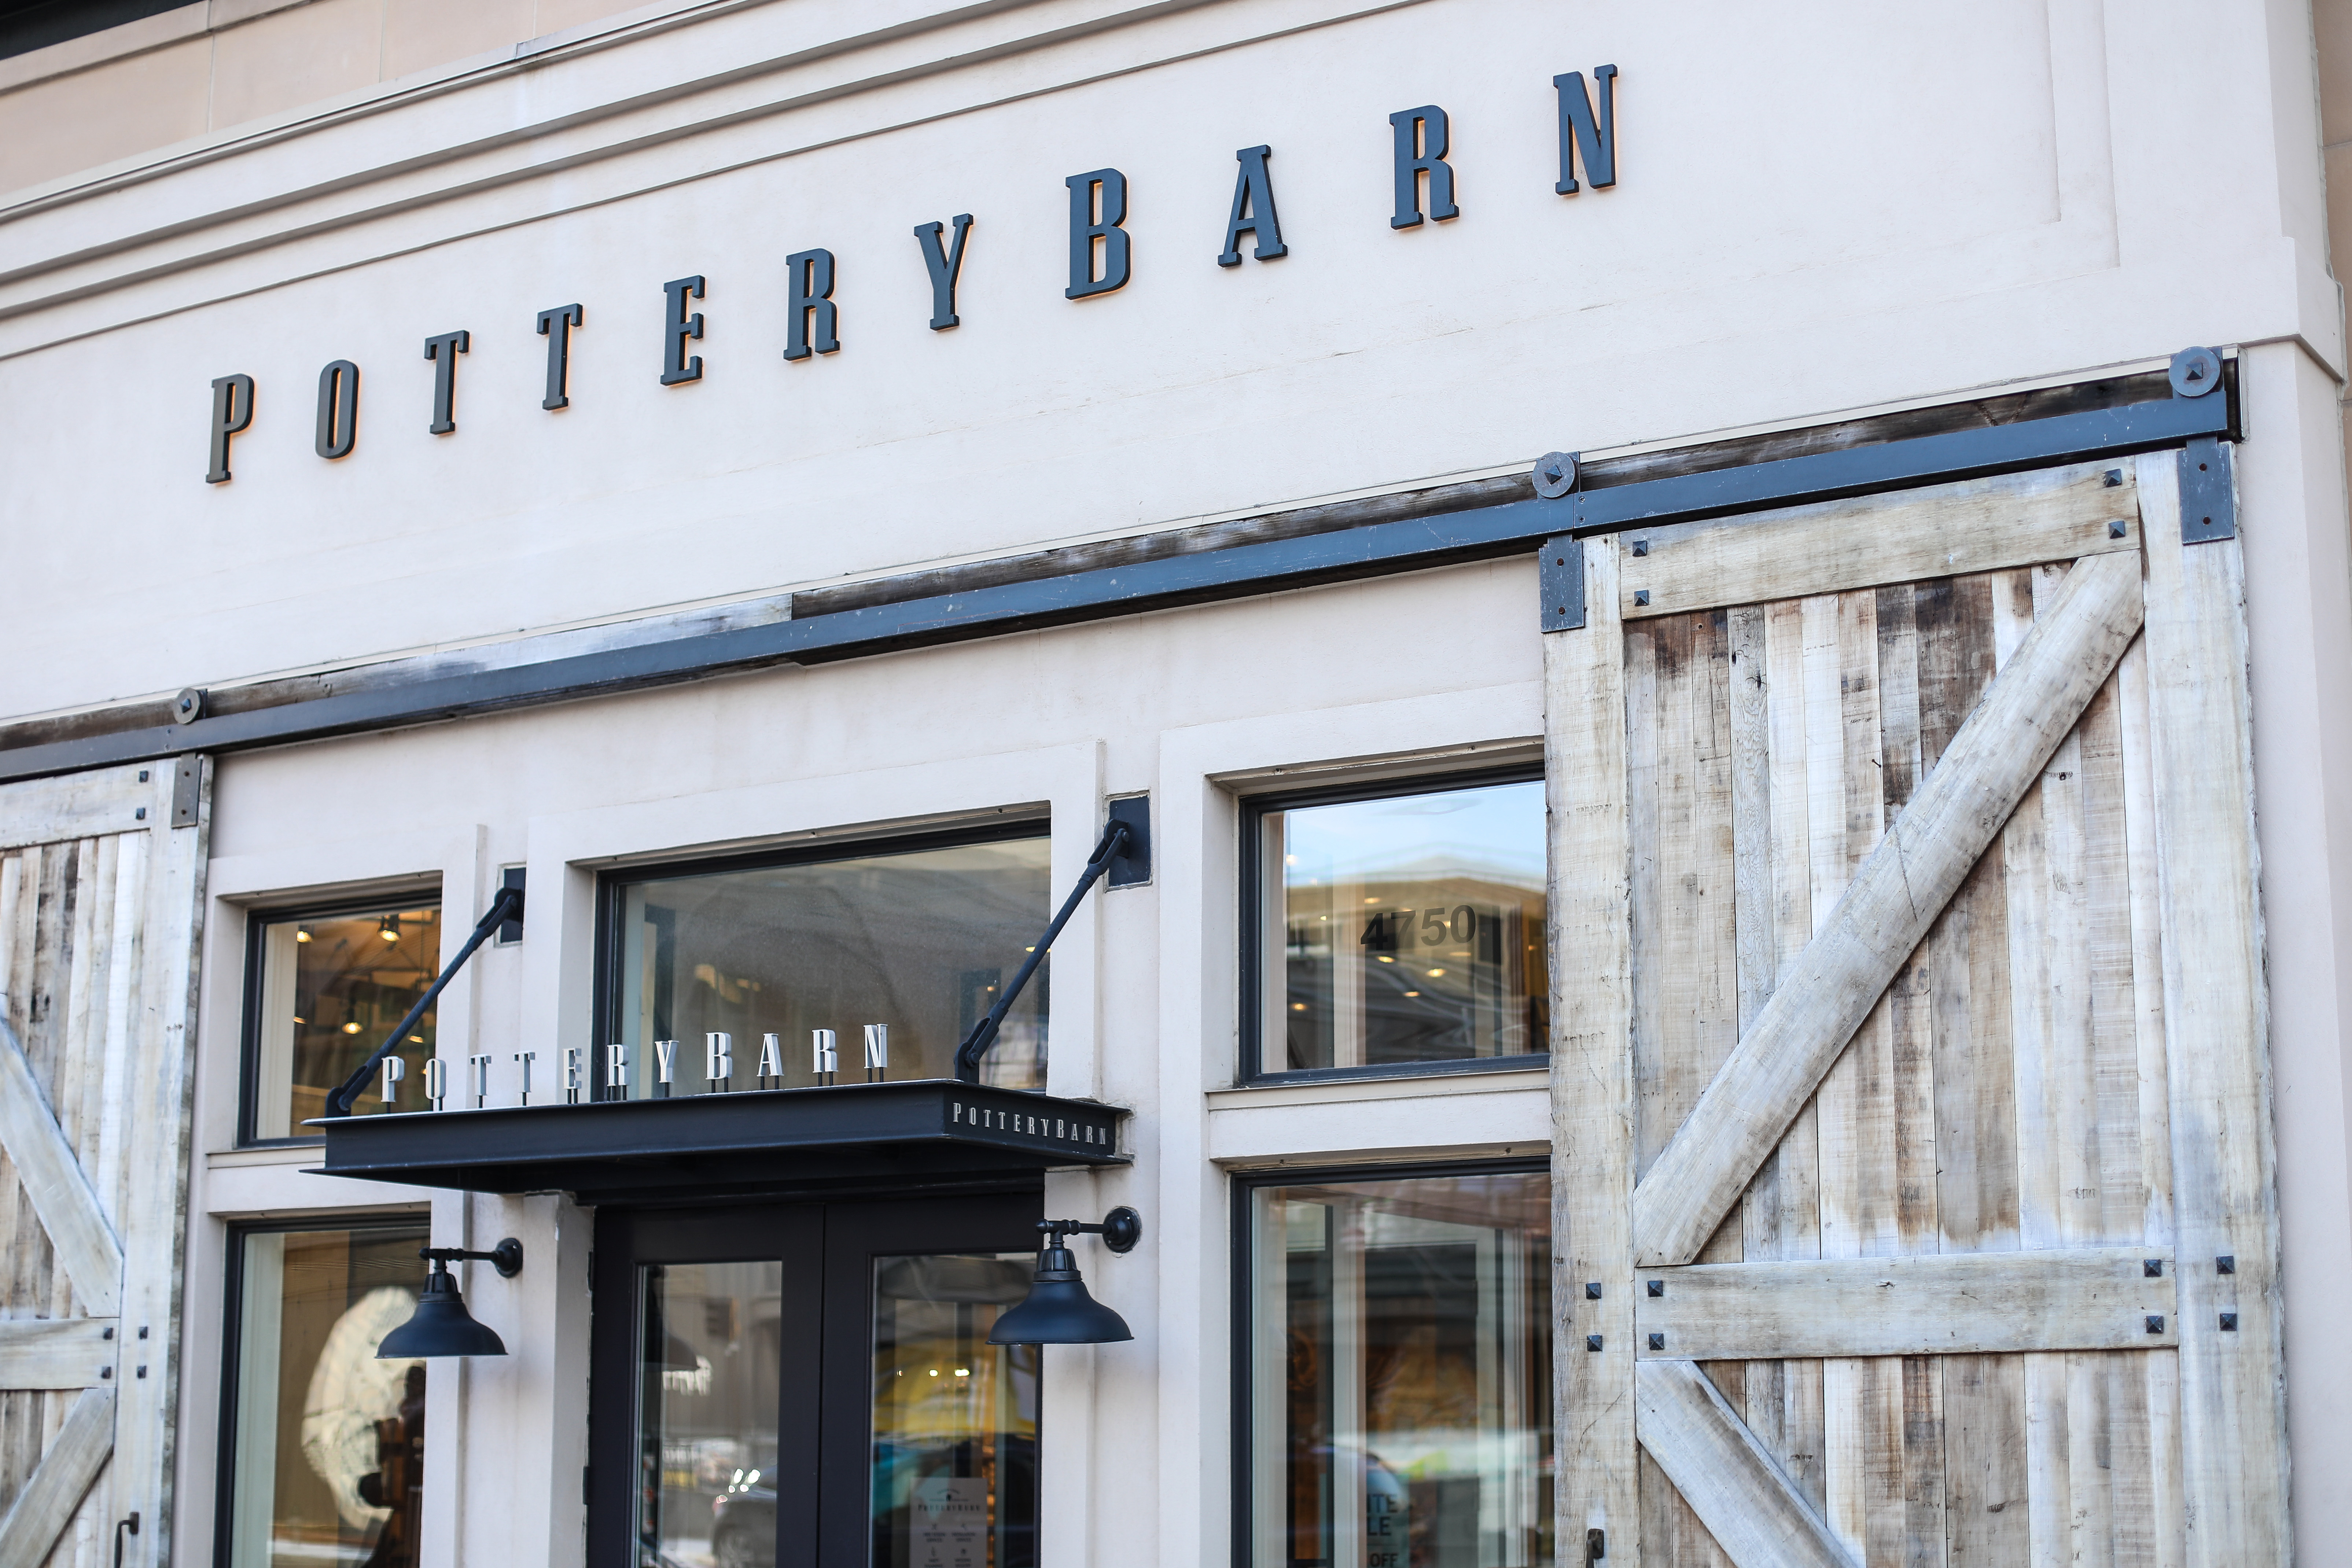 Does Pottery Barn have a warranty? Everything you need to know